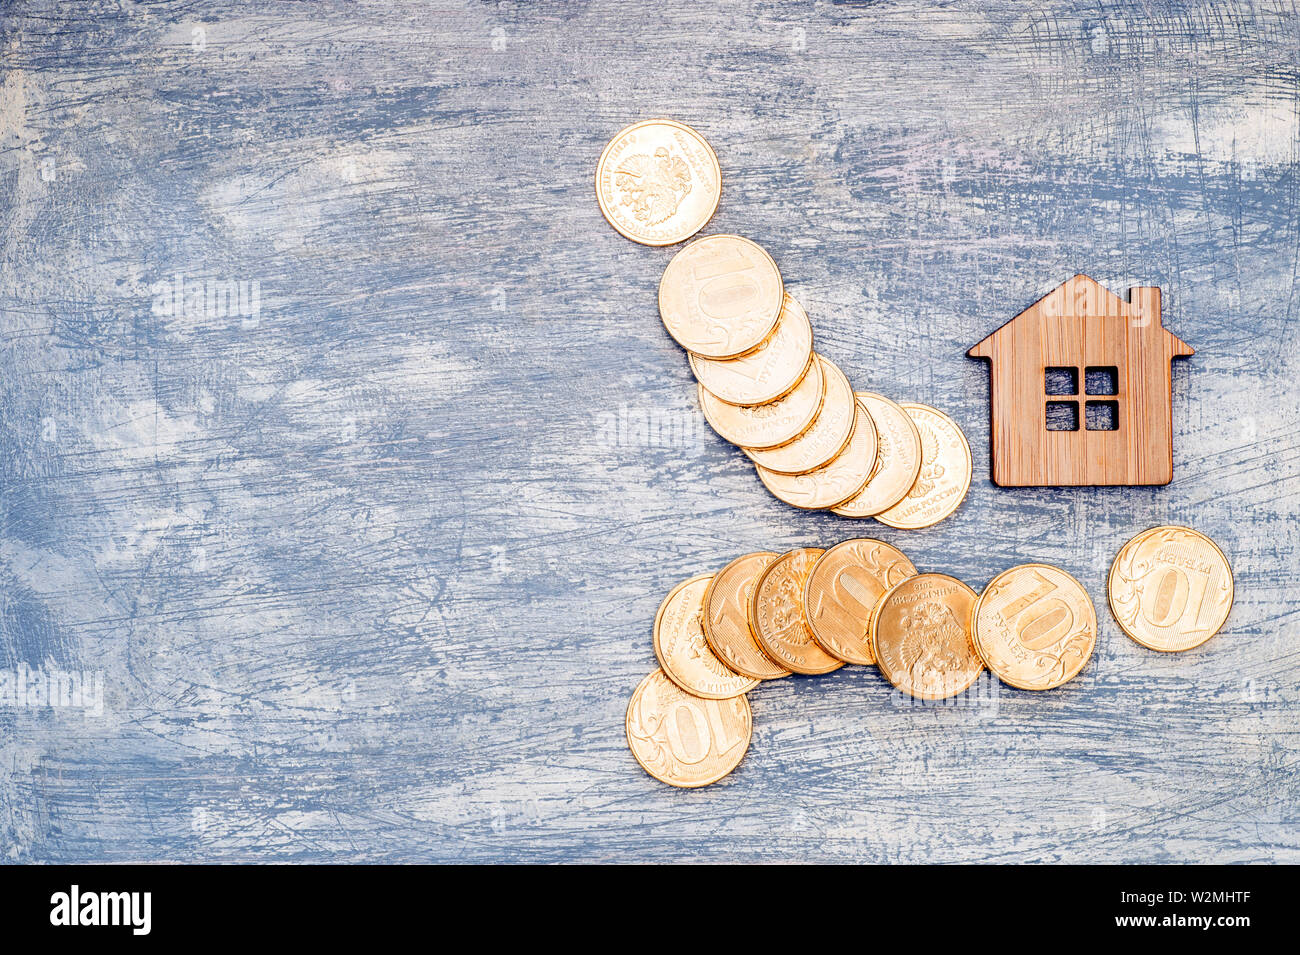 Imitation of a house with metal ten-ruble coins of Russia on a scratched background under the concrete. Stock Photo